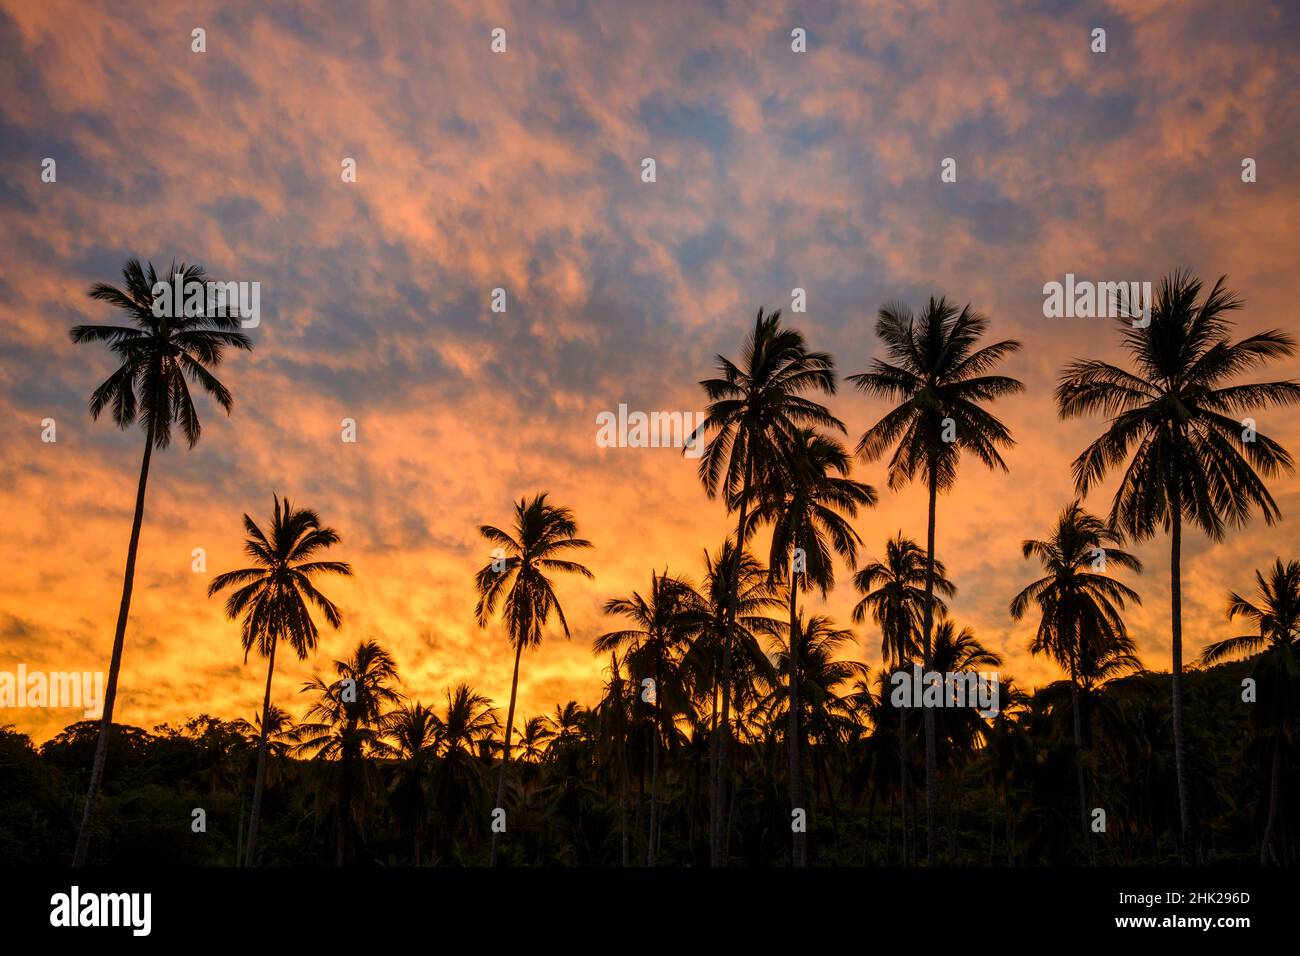 Coconut palm trees and a colorful sunrise sky in Chacala on Mexico's Riviera Nayarit coast. Stock Photo